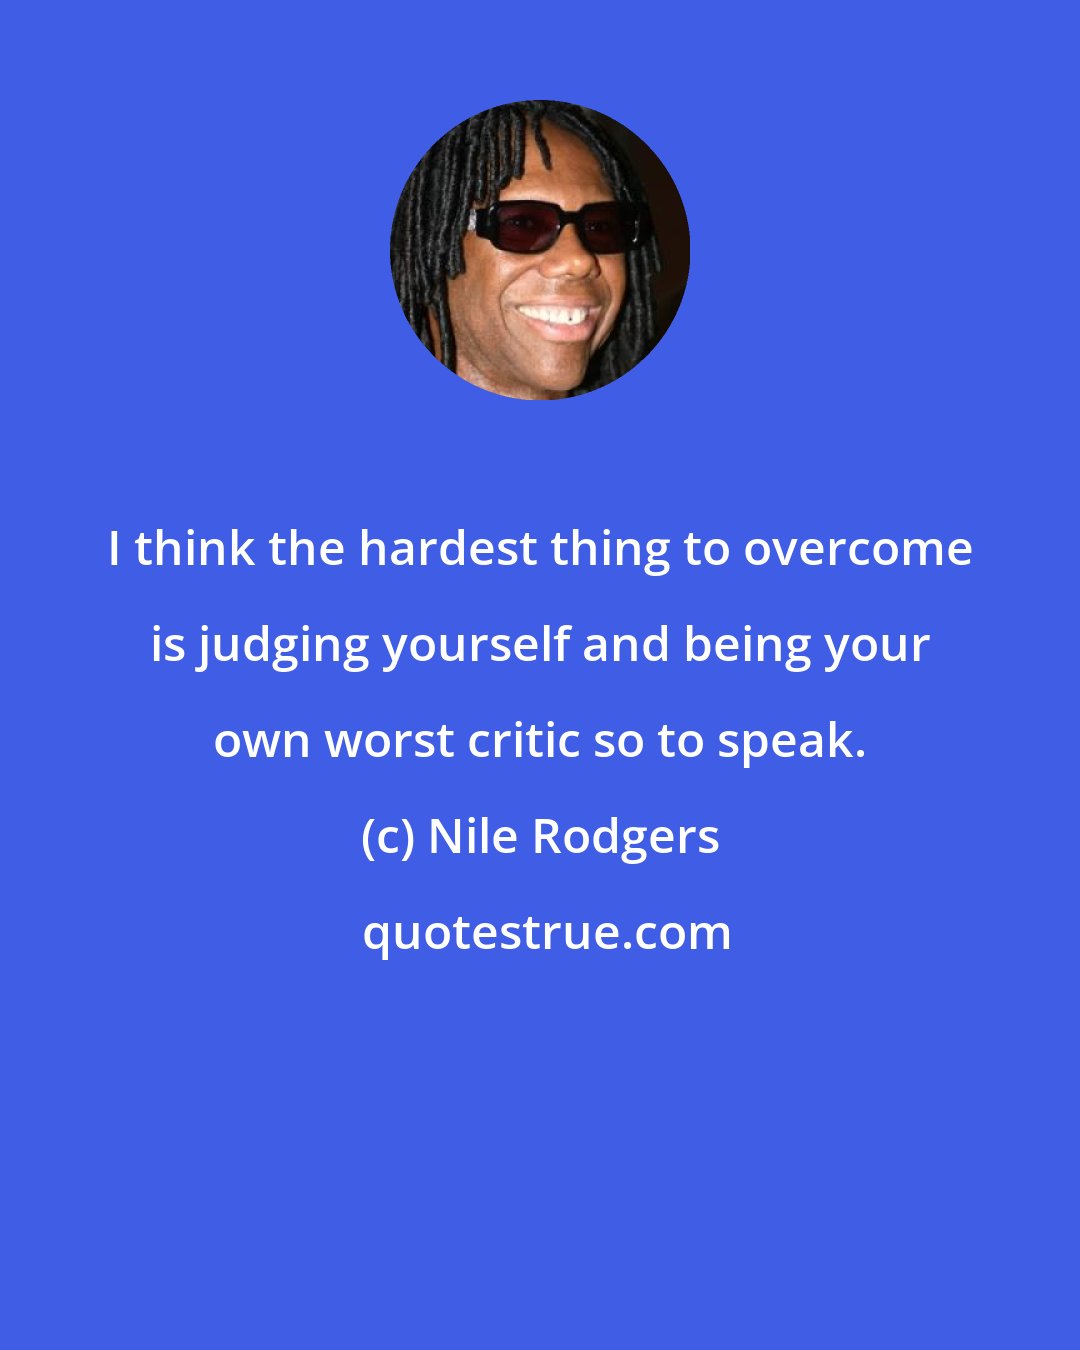 Nile Rodgers: I think the hardest thing to overcome is judging yourself and being your own worst critic so to speak.